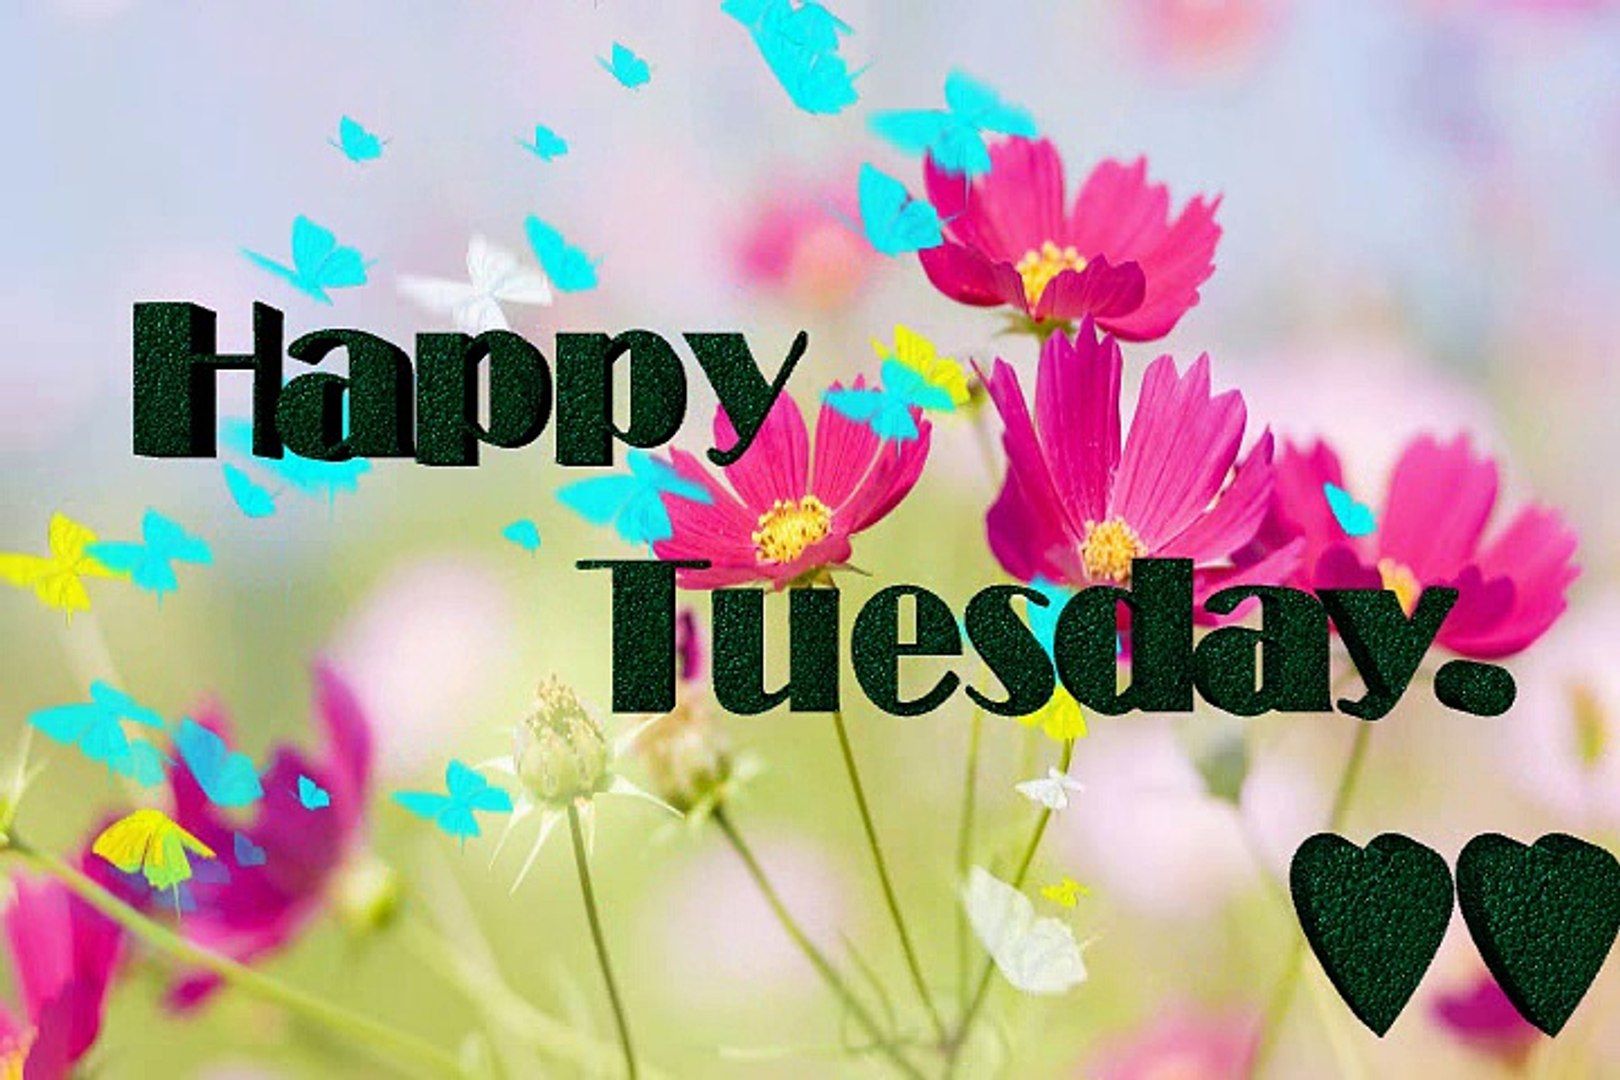 Happy tuesday Good Morning Wishes, Happy .dailymotion.com